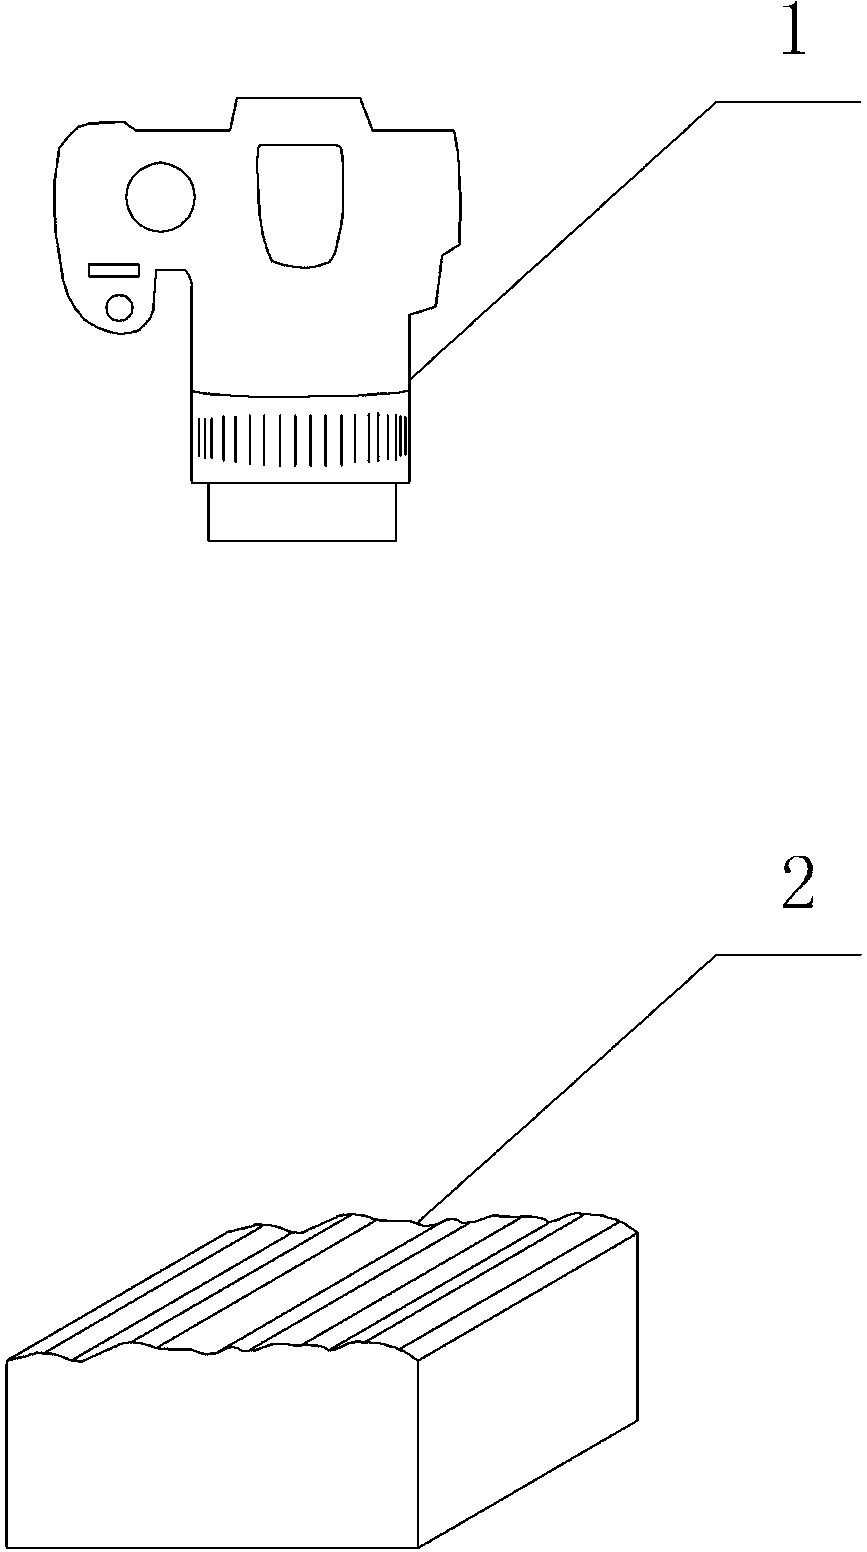 Method for measuring shearing area of rock structral plane in direct shear test